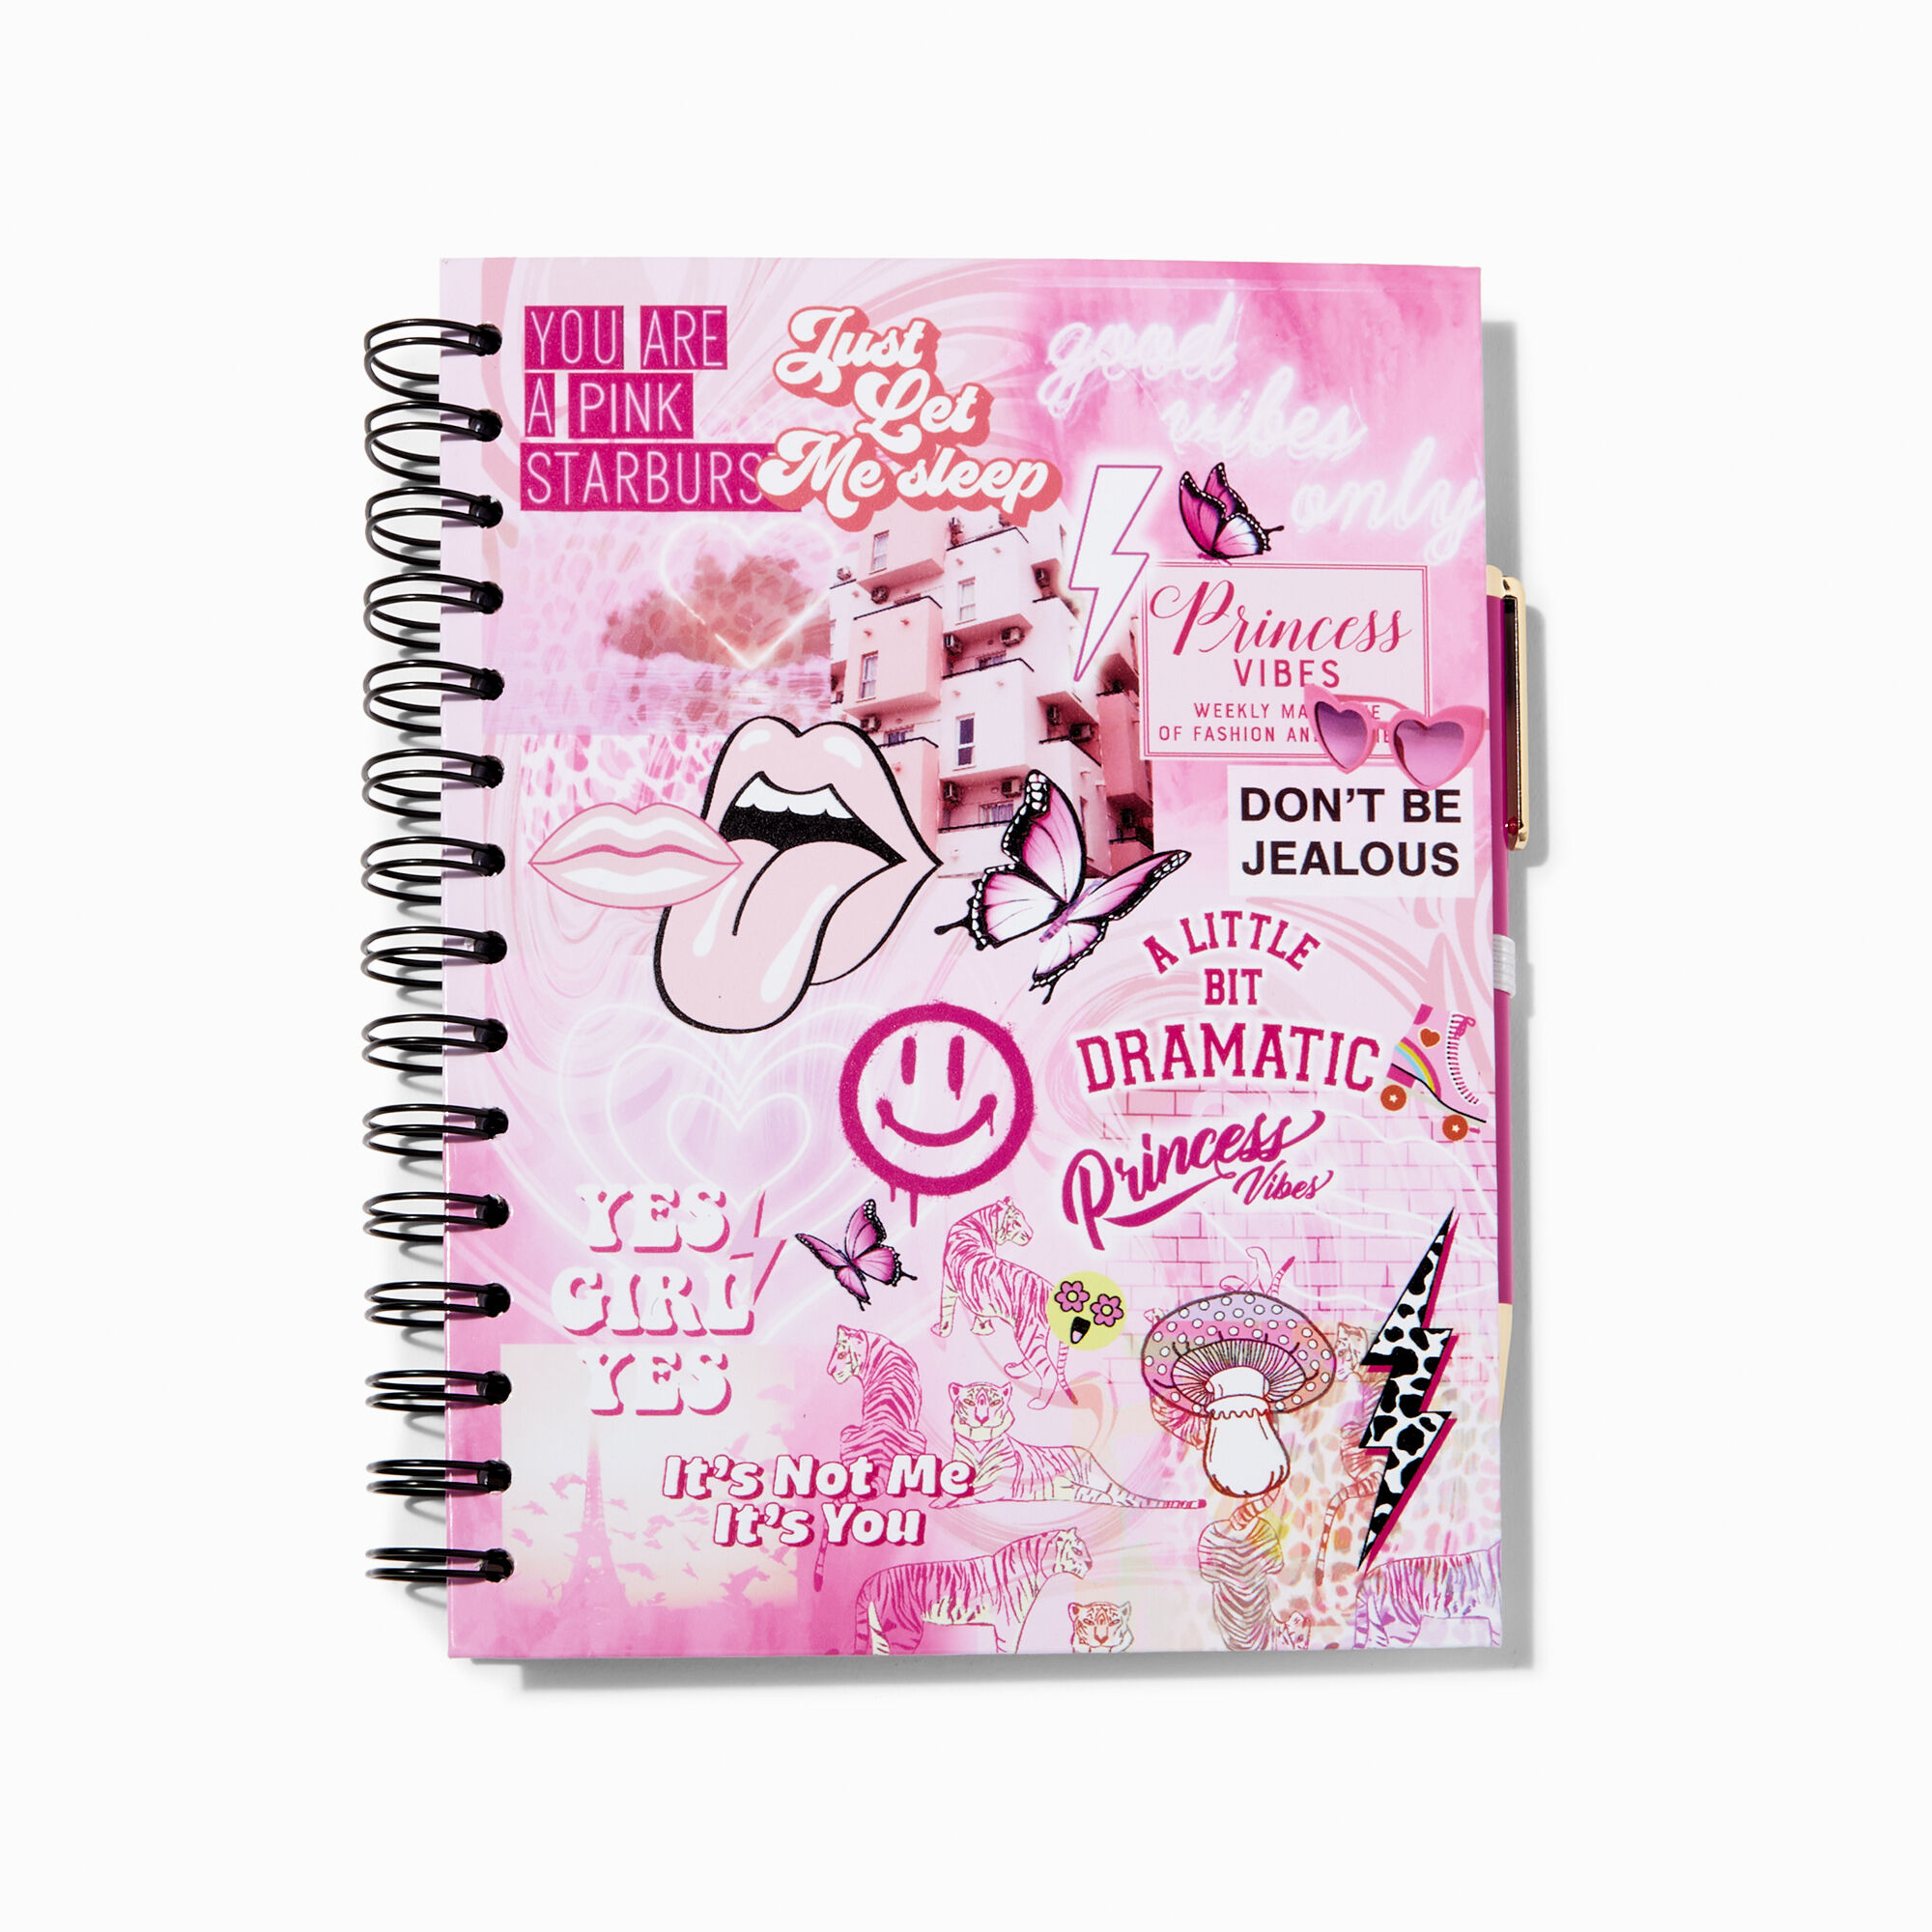 View Claires Princess Vibes Spiral Notebook Pink information